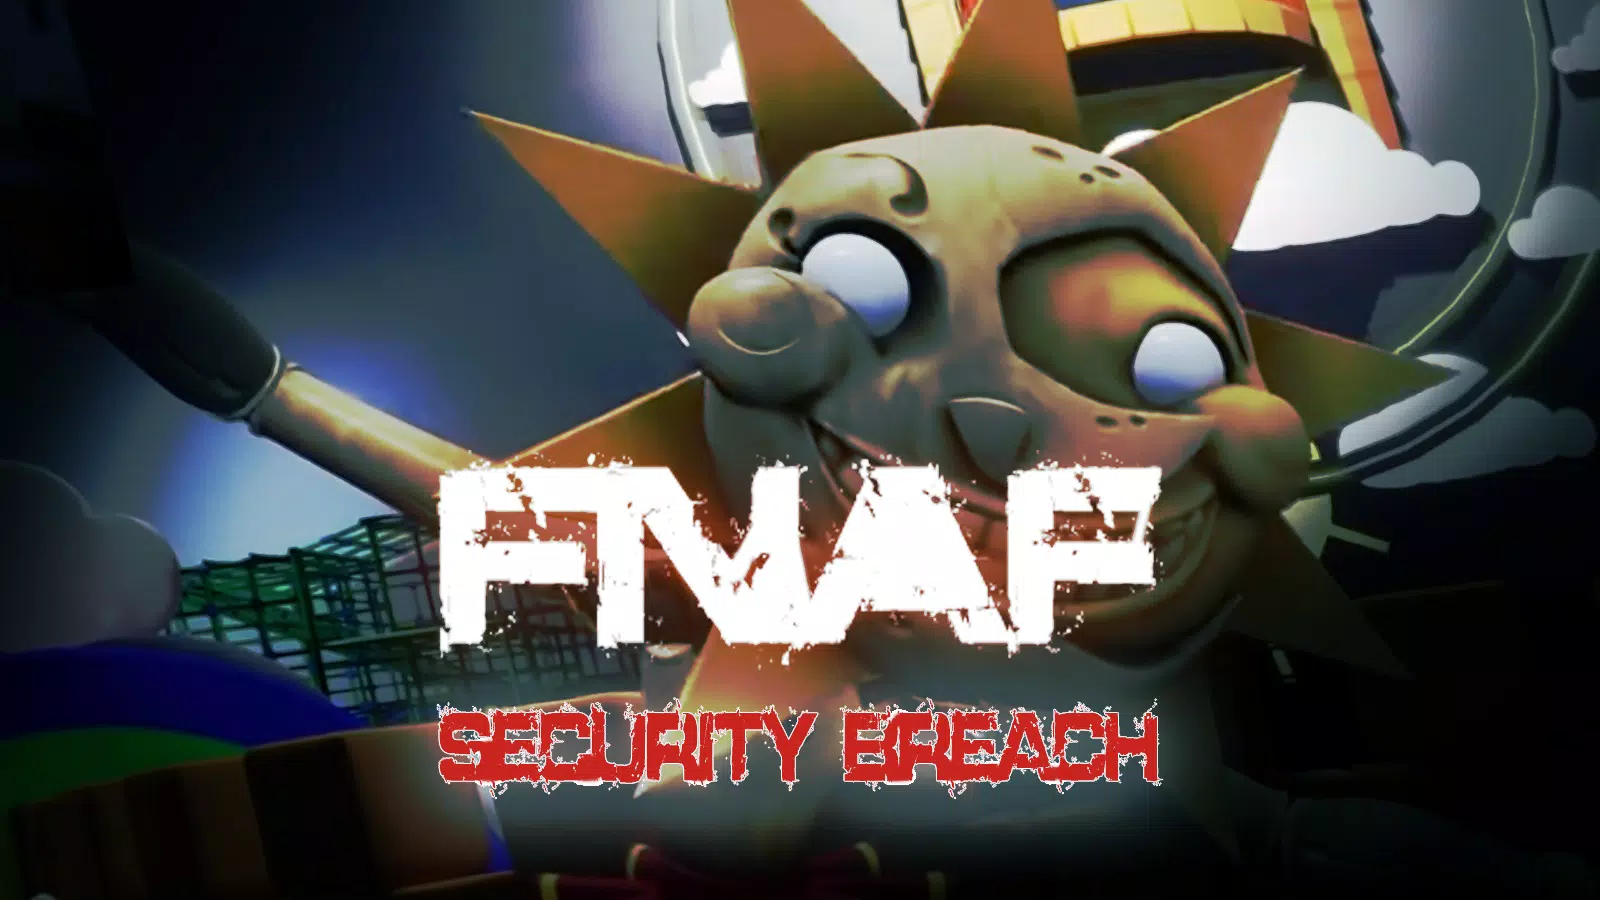 FNAF Security Breach Apk For Android [HW 2024]